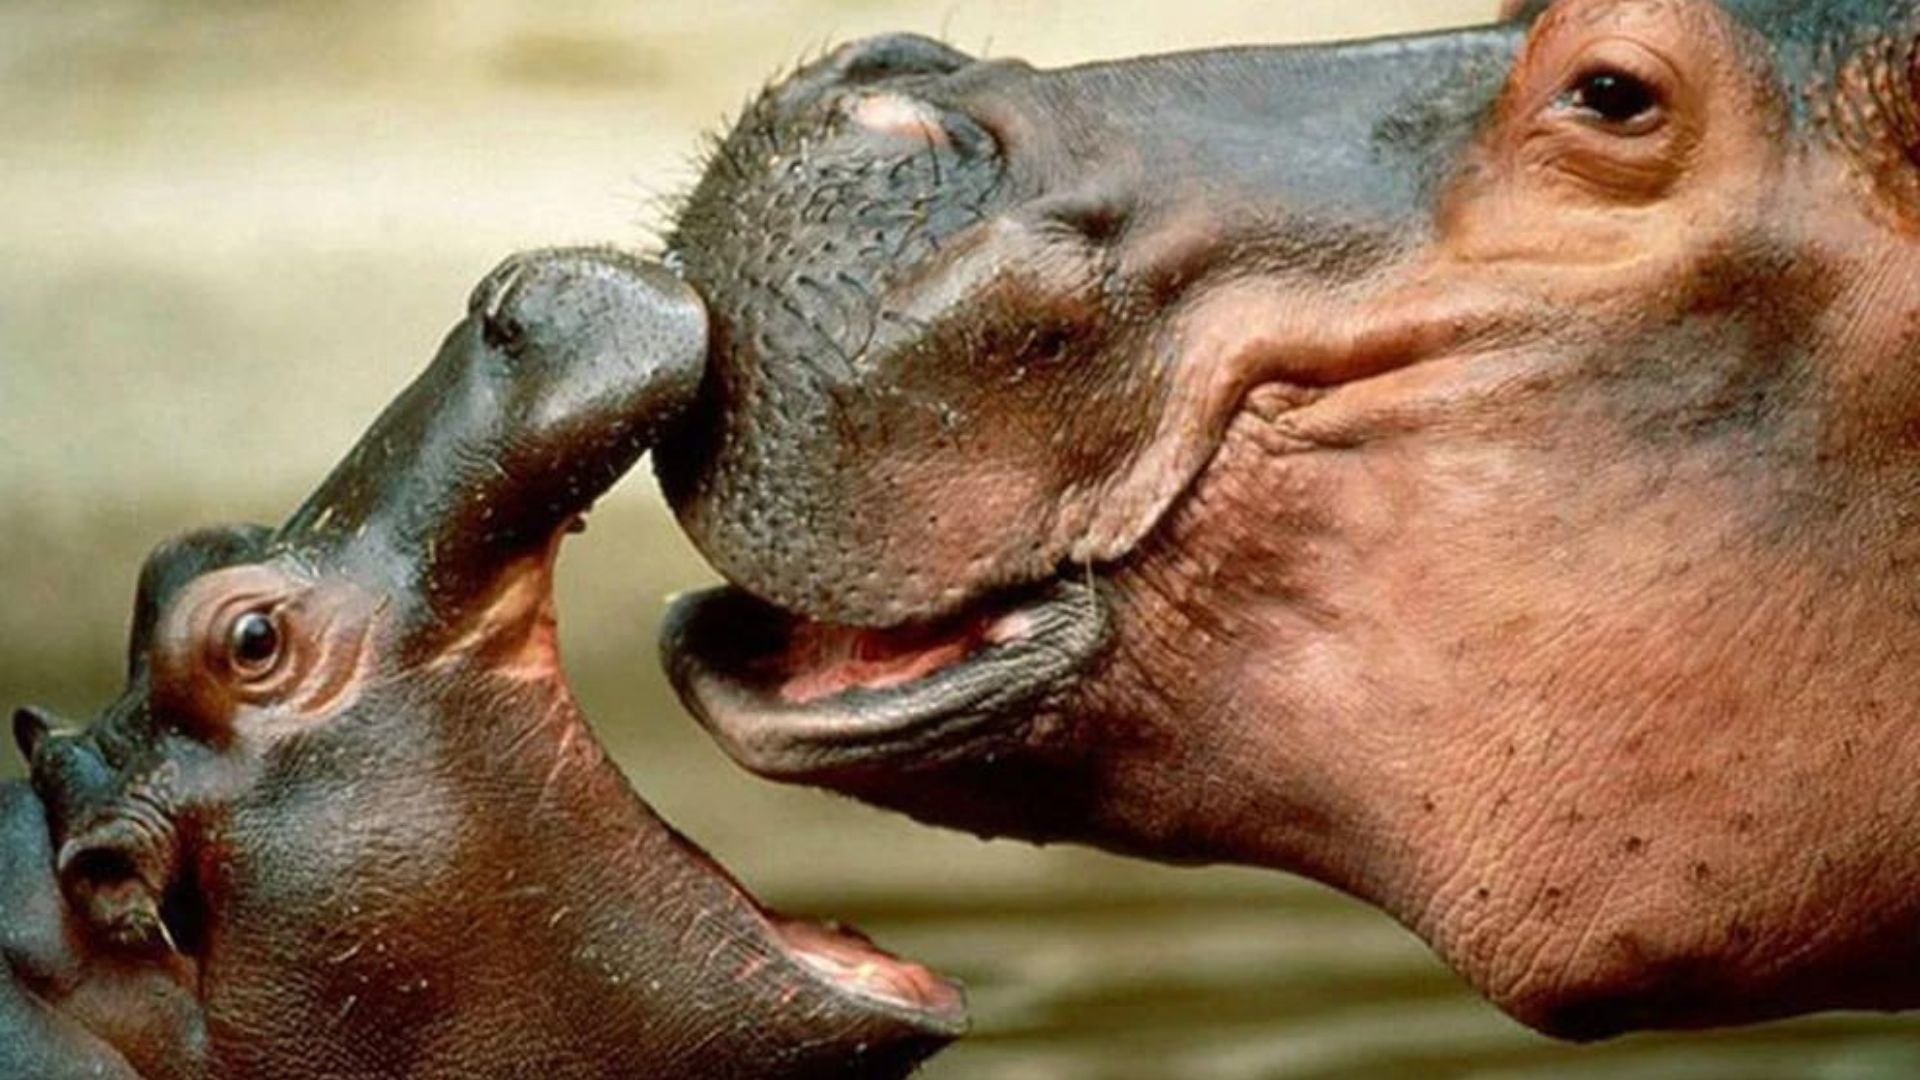 Hippos have been captured leaving rivers during solar eclipses to go to their feeding grounds (Shutterstock)